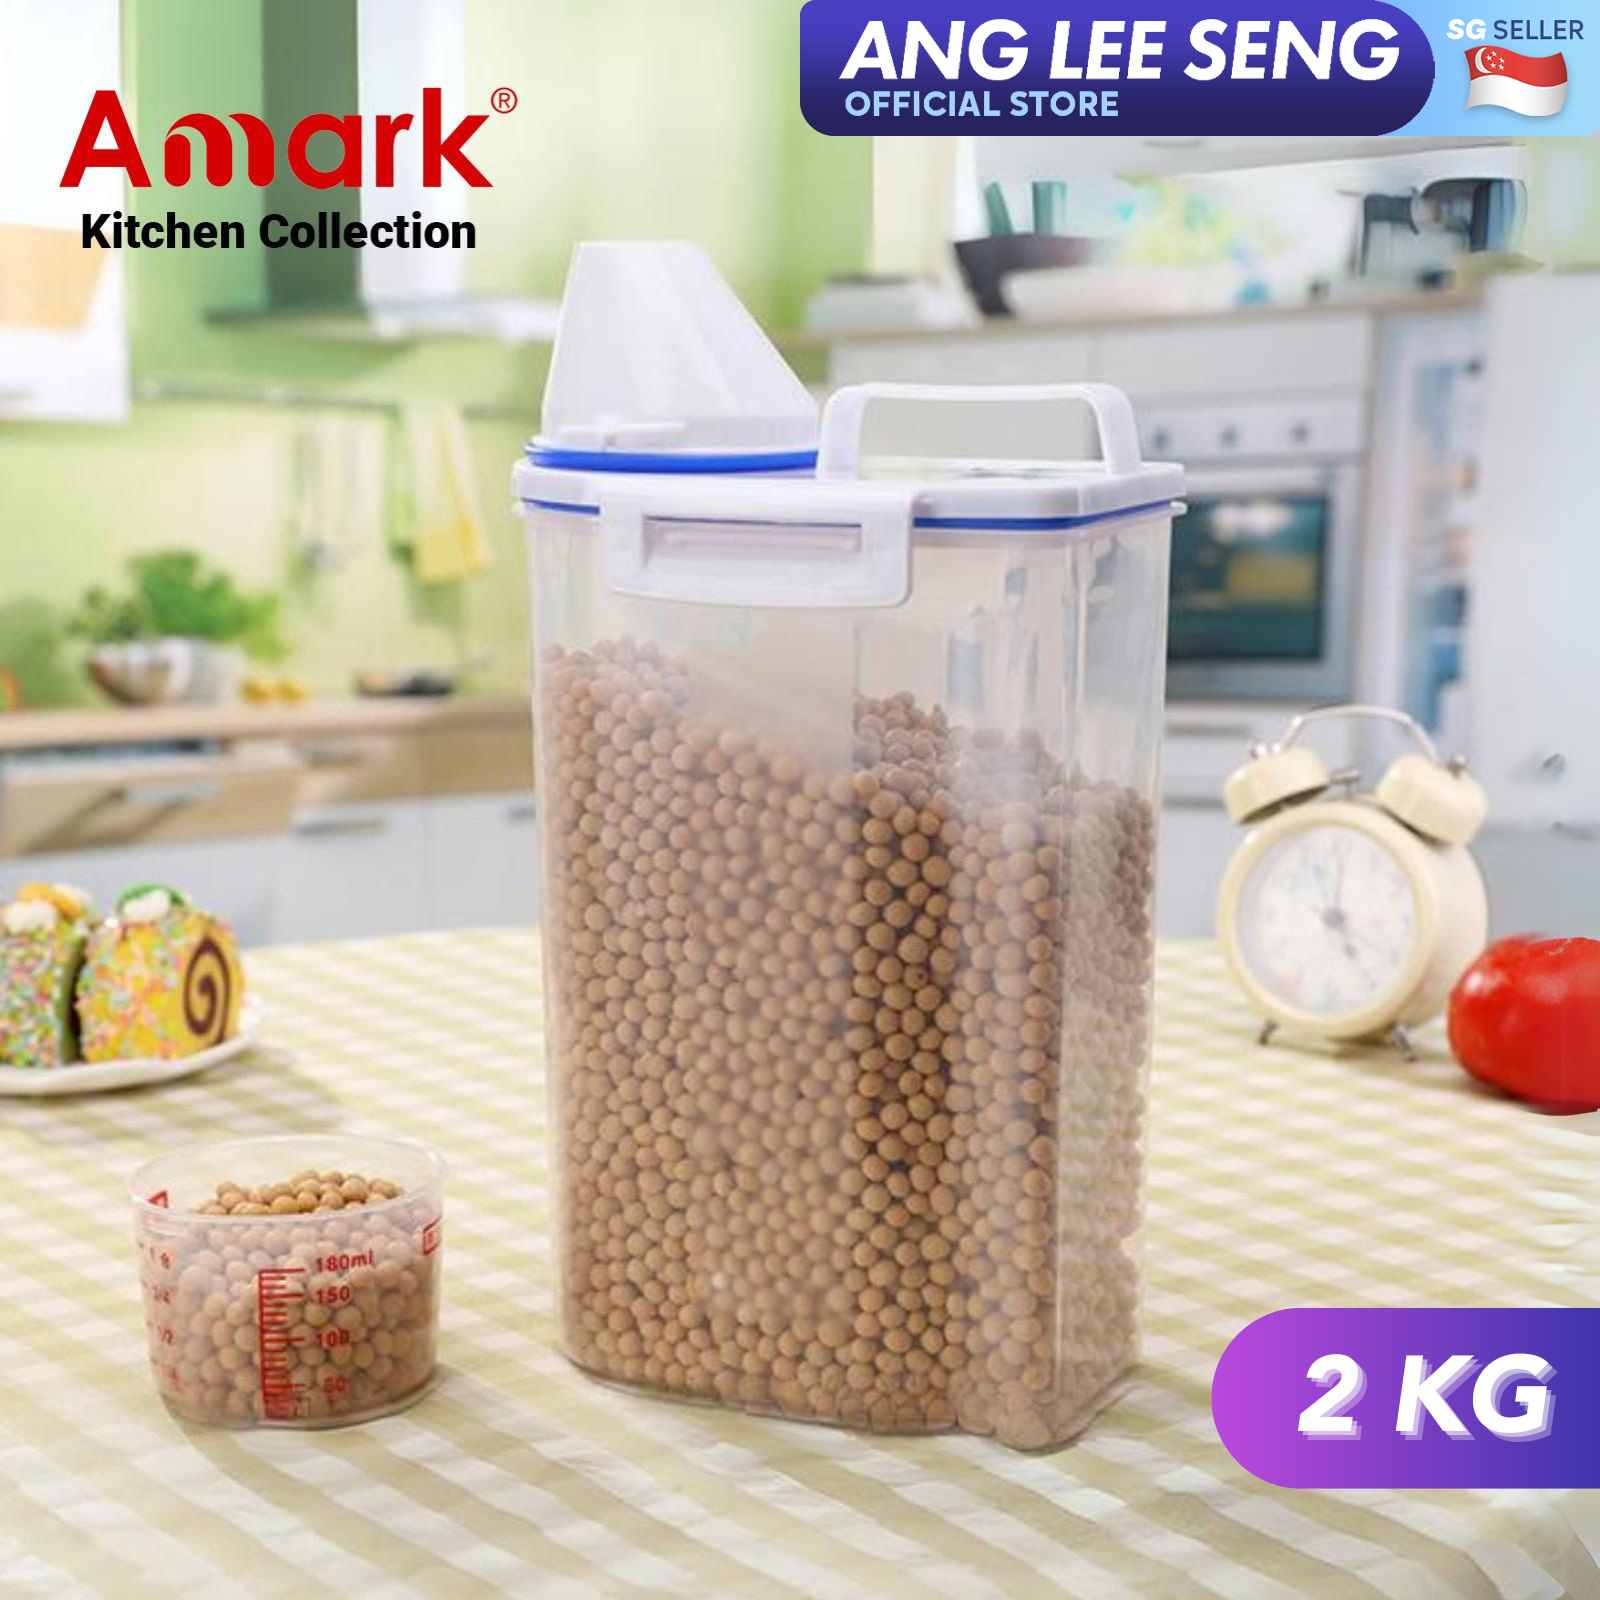 Amark Kitchen Collection Rice Stocker Container 2kg with Pouring Spout & Measuring Cup - Dried Food & Pet Kibble Storage